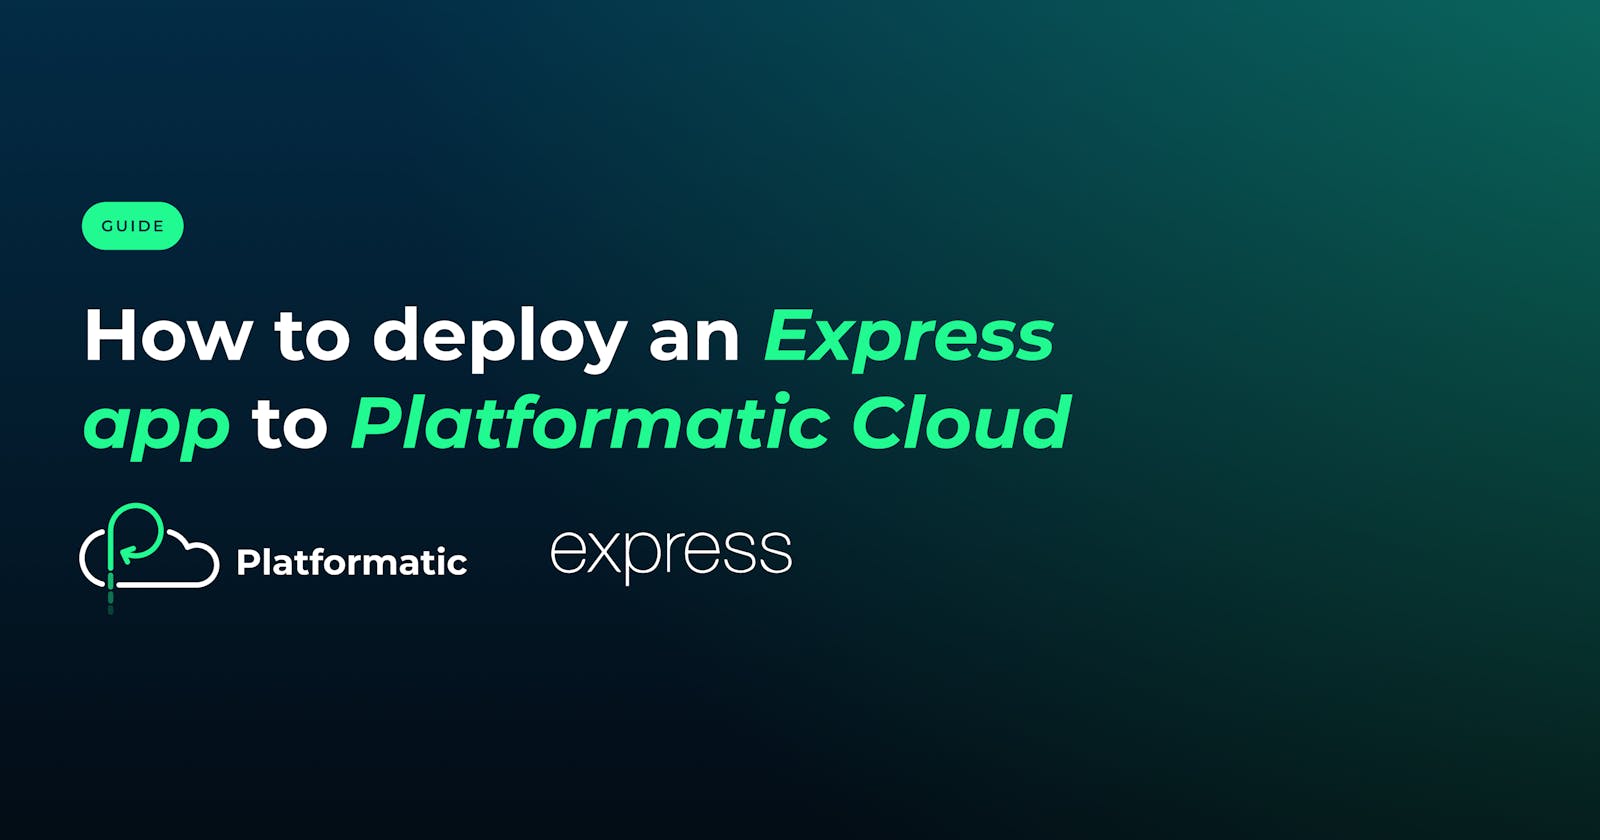 How to deploy an Express app to Platformatic Cloud